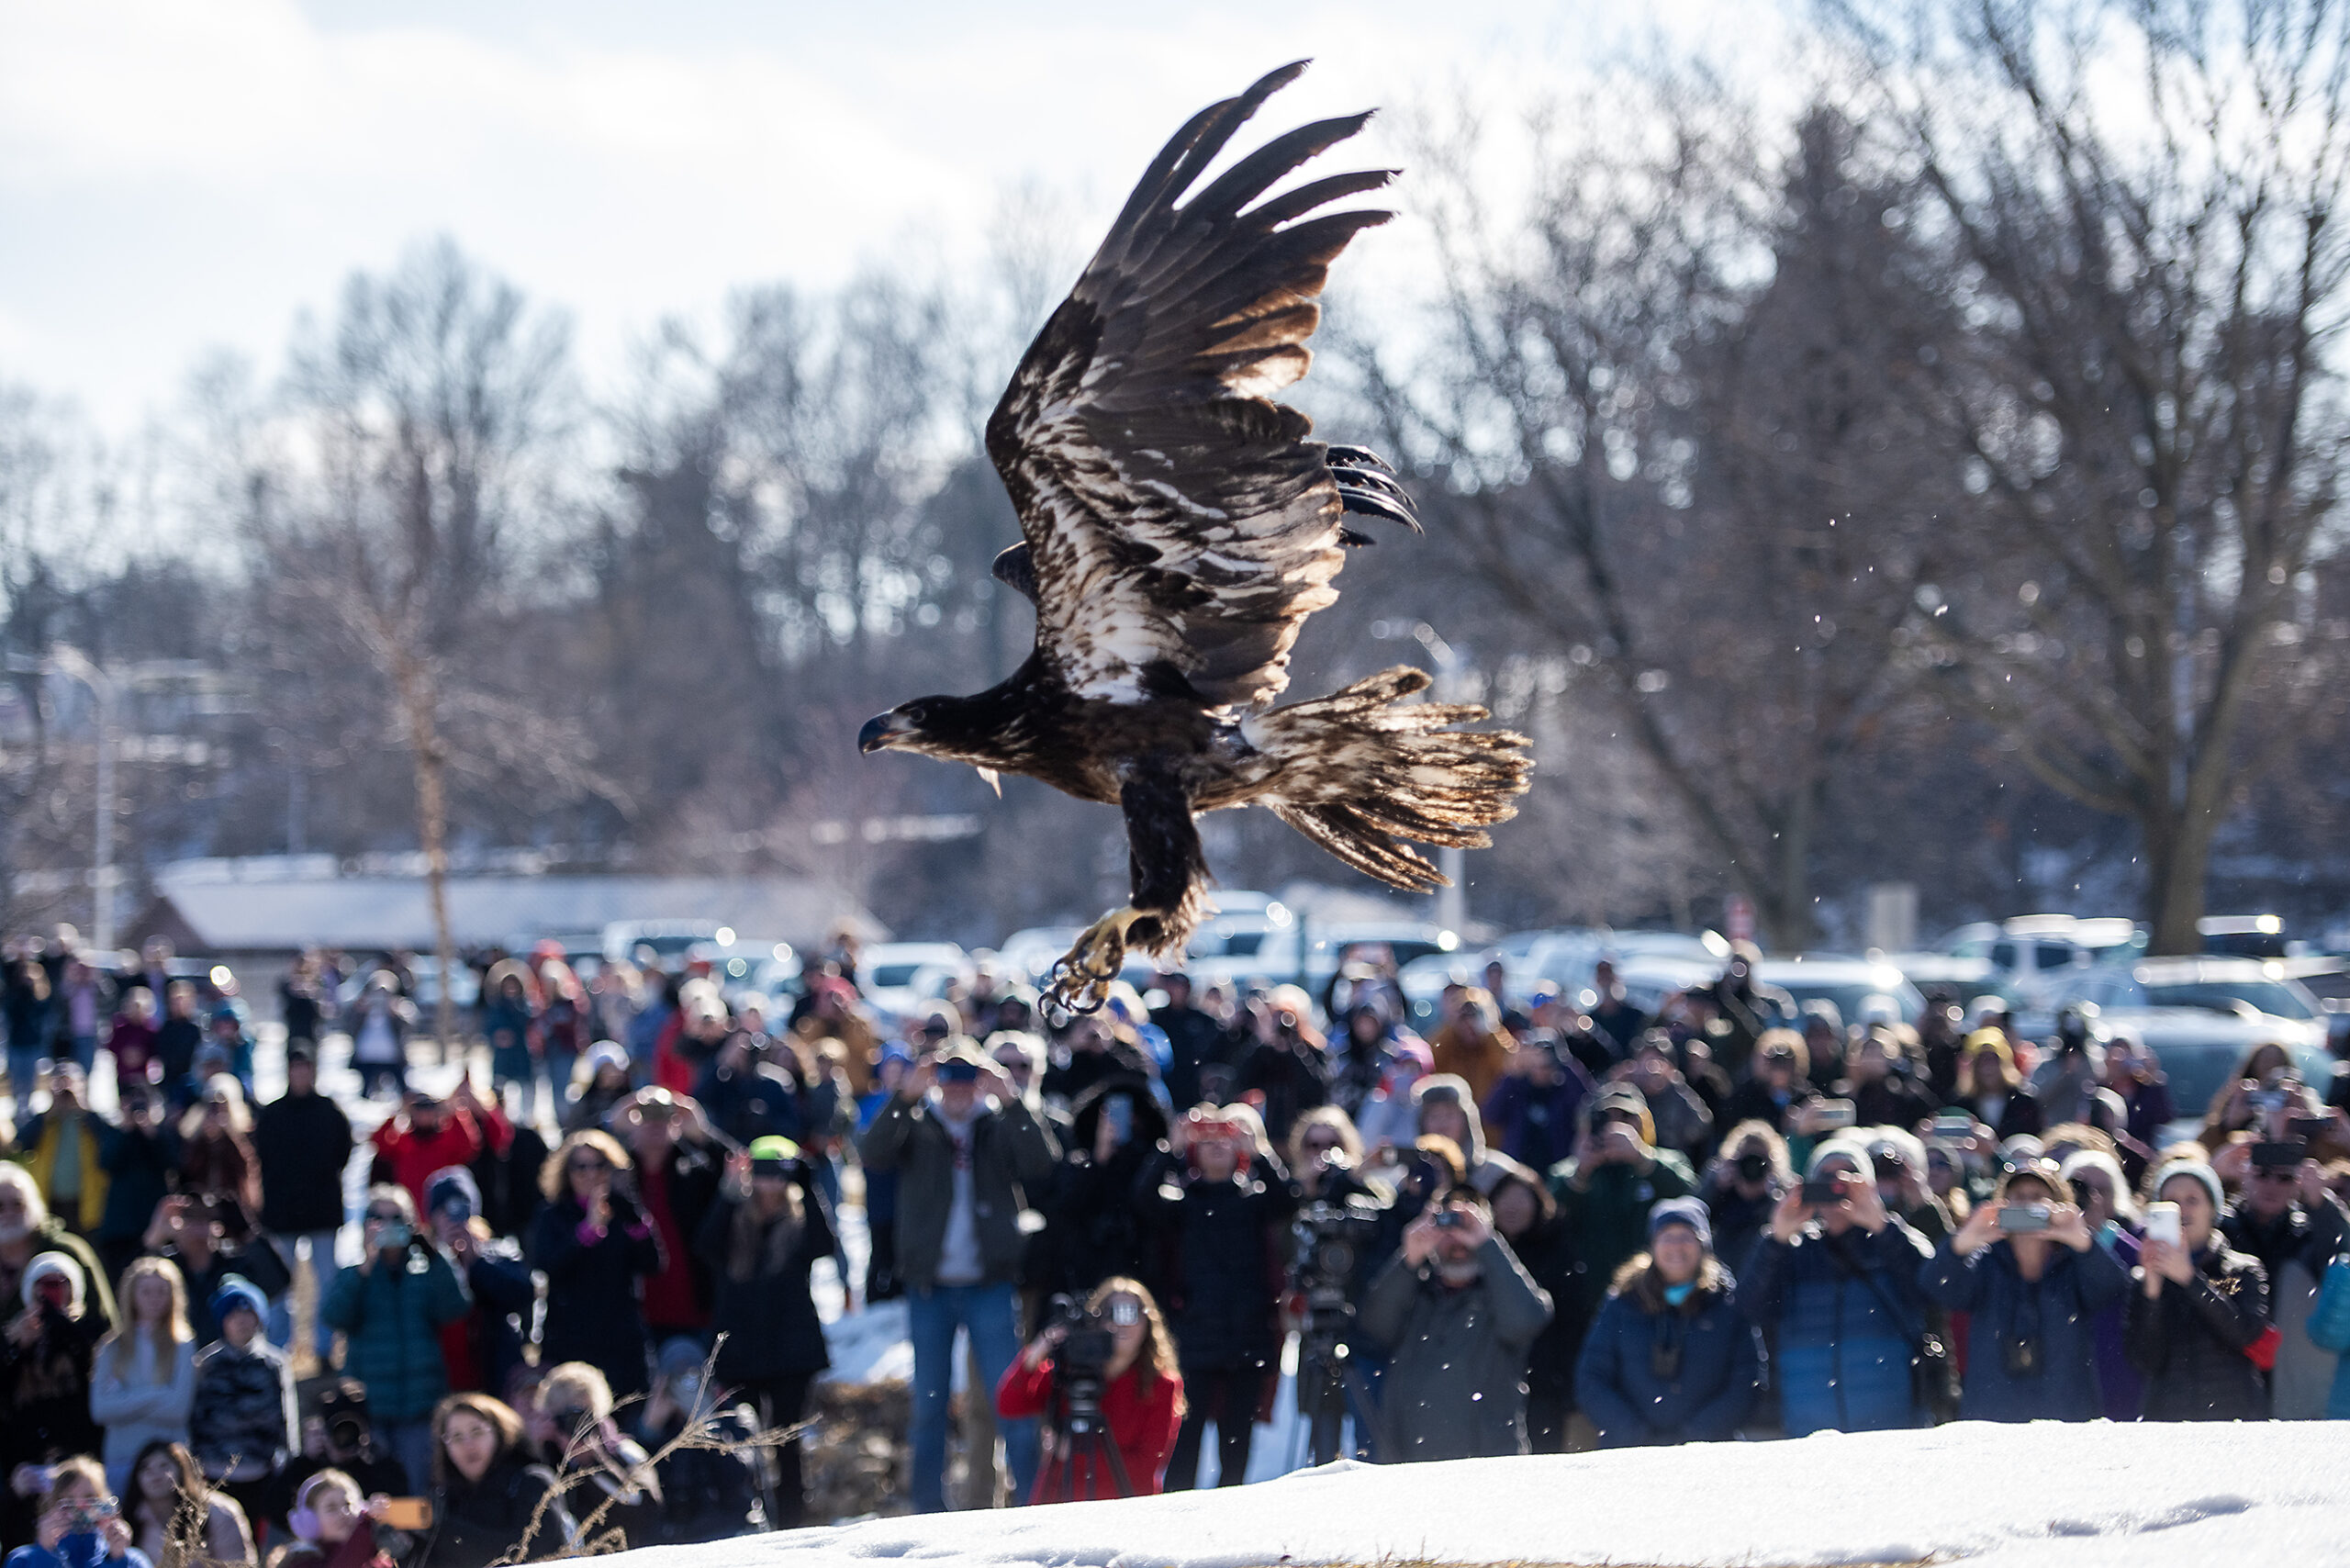 An eagle is seen from the side as it flies. A large crowd holds up phones and cameras as they watch.